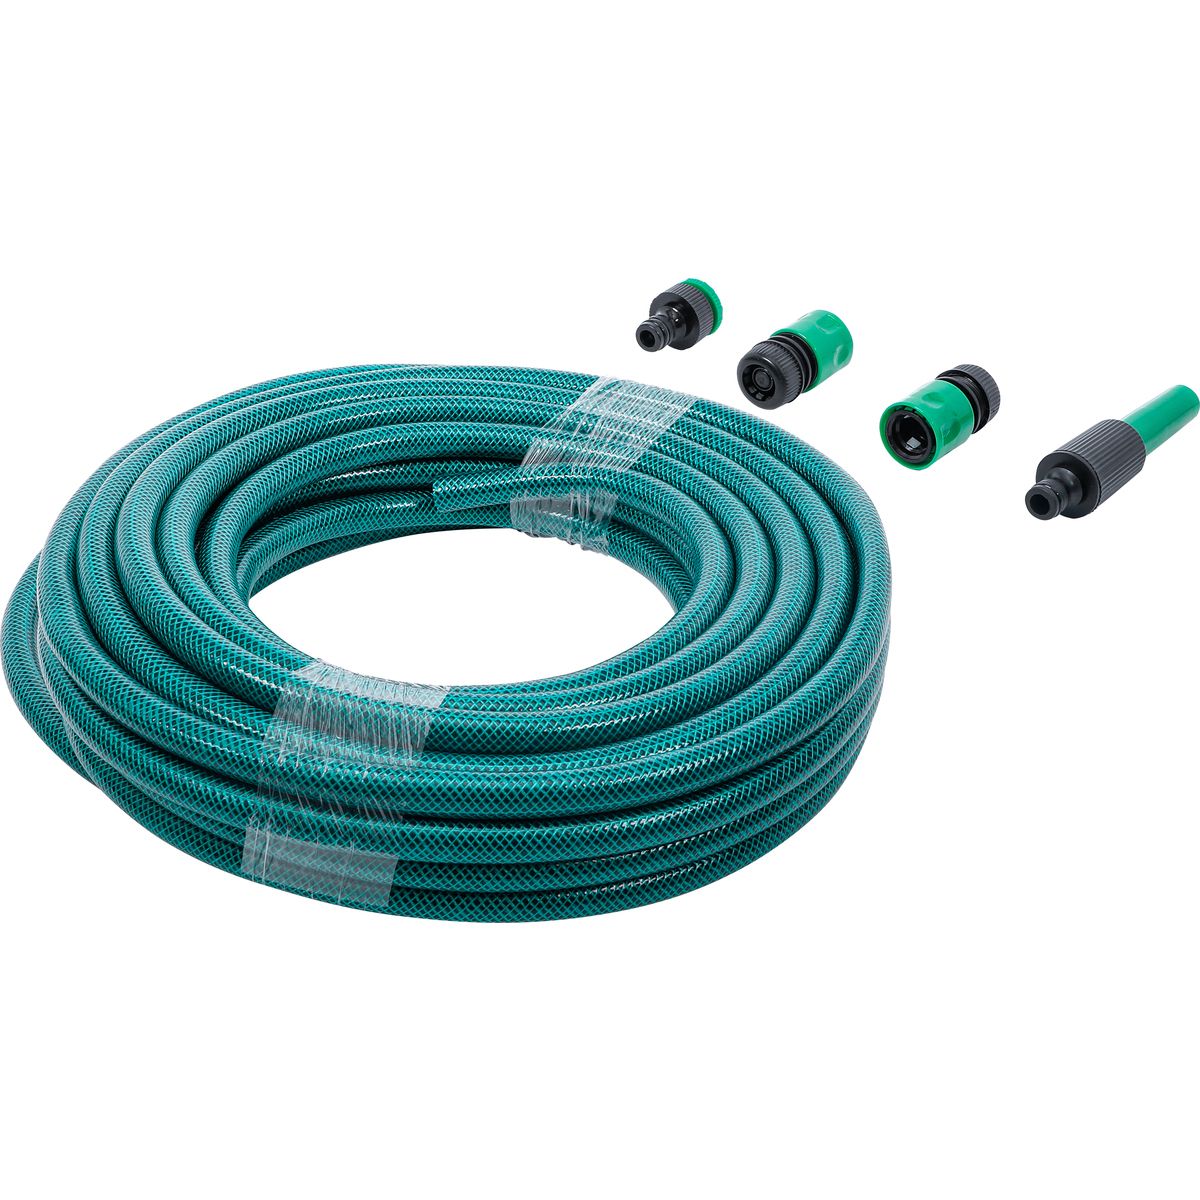 Water hose | PVC | with Water Spray Gun and Quick Couplings | 15 m | 6-pcs.